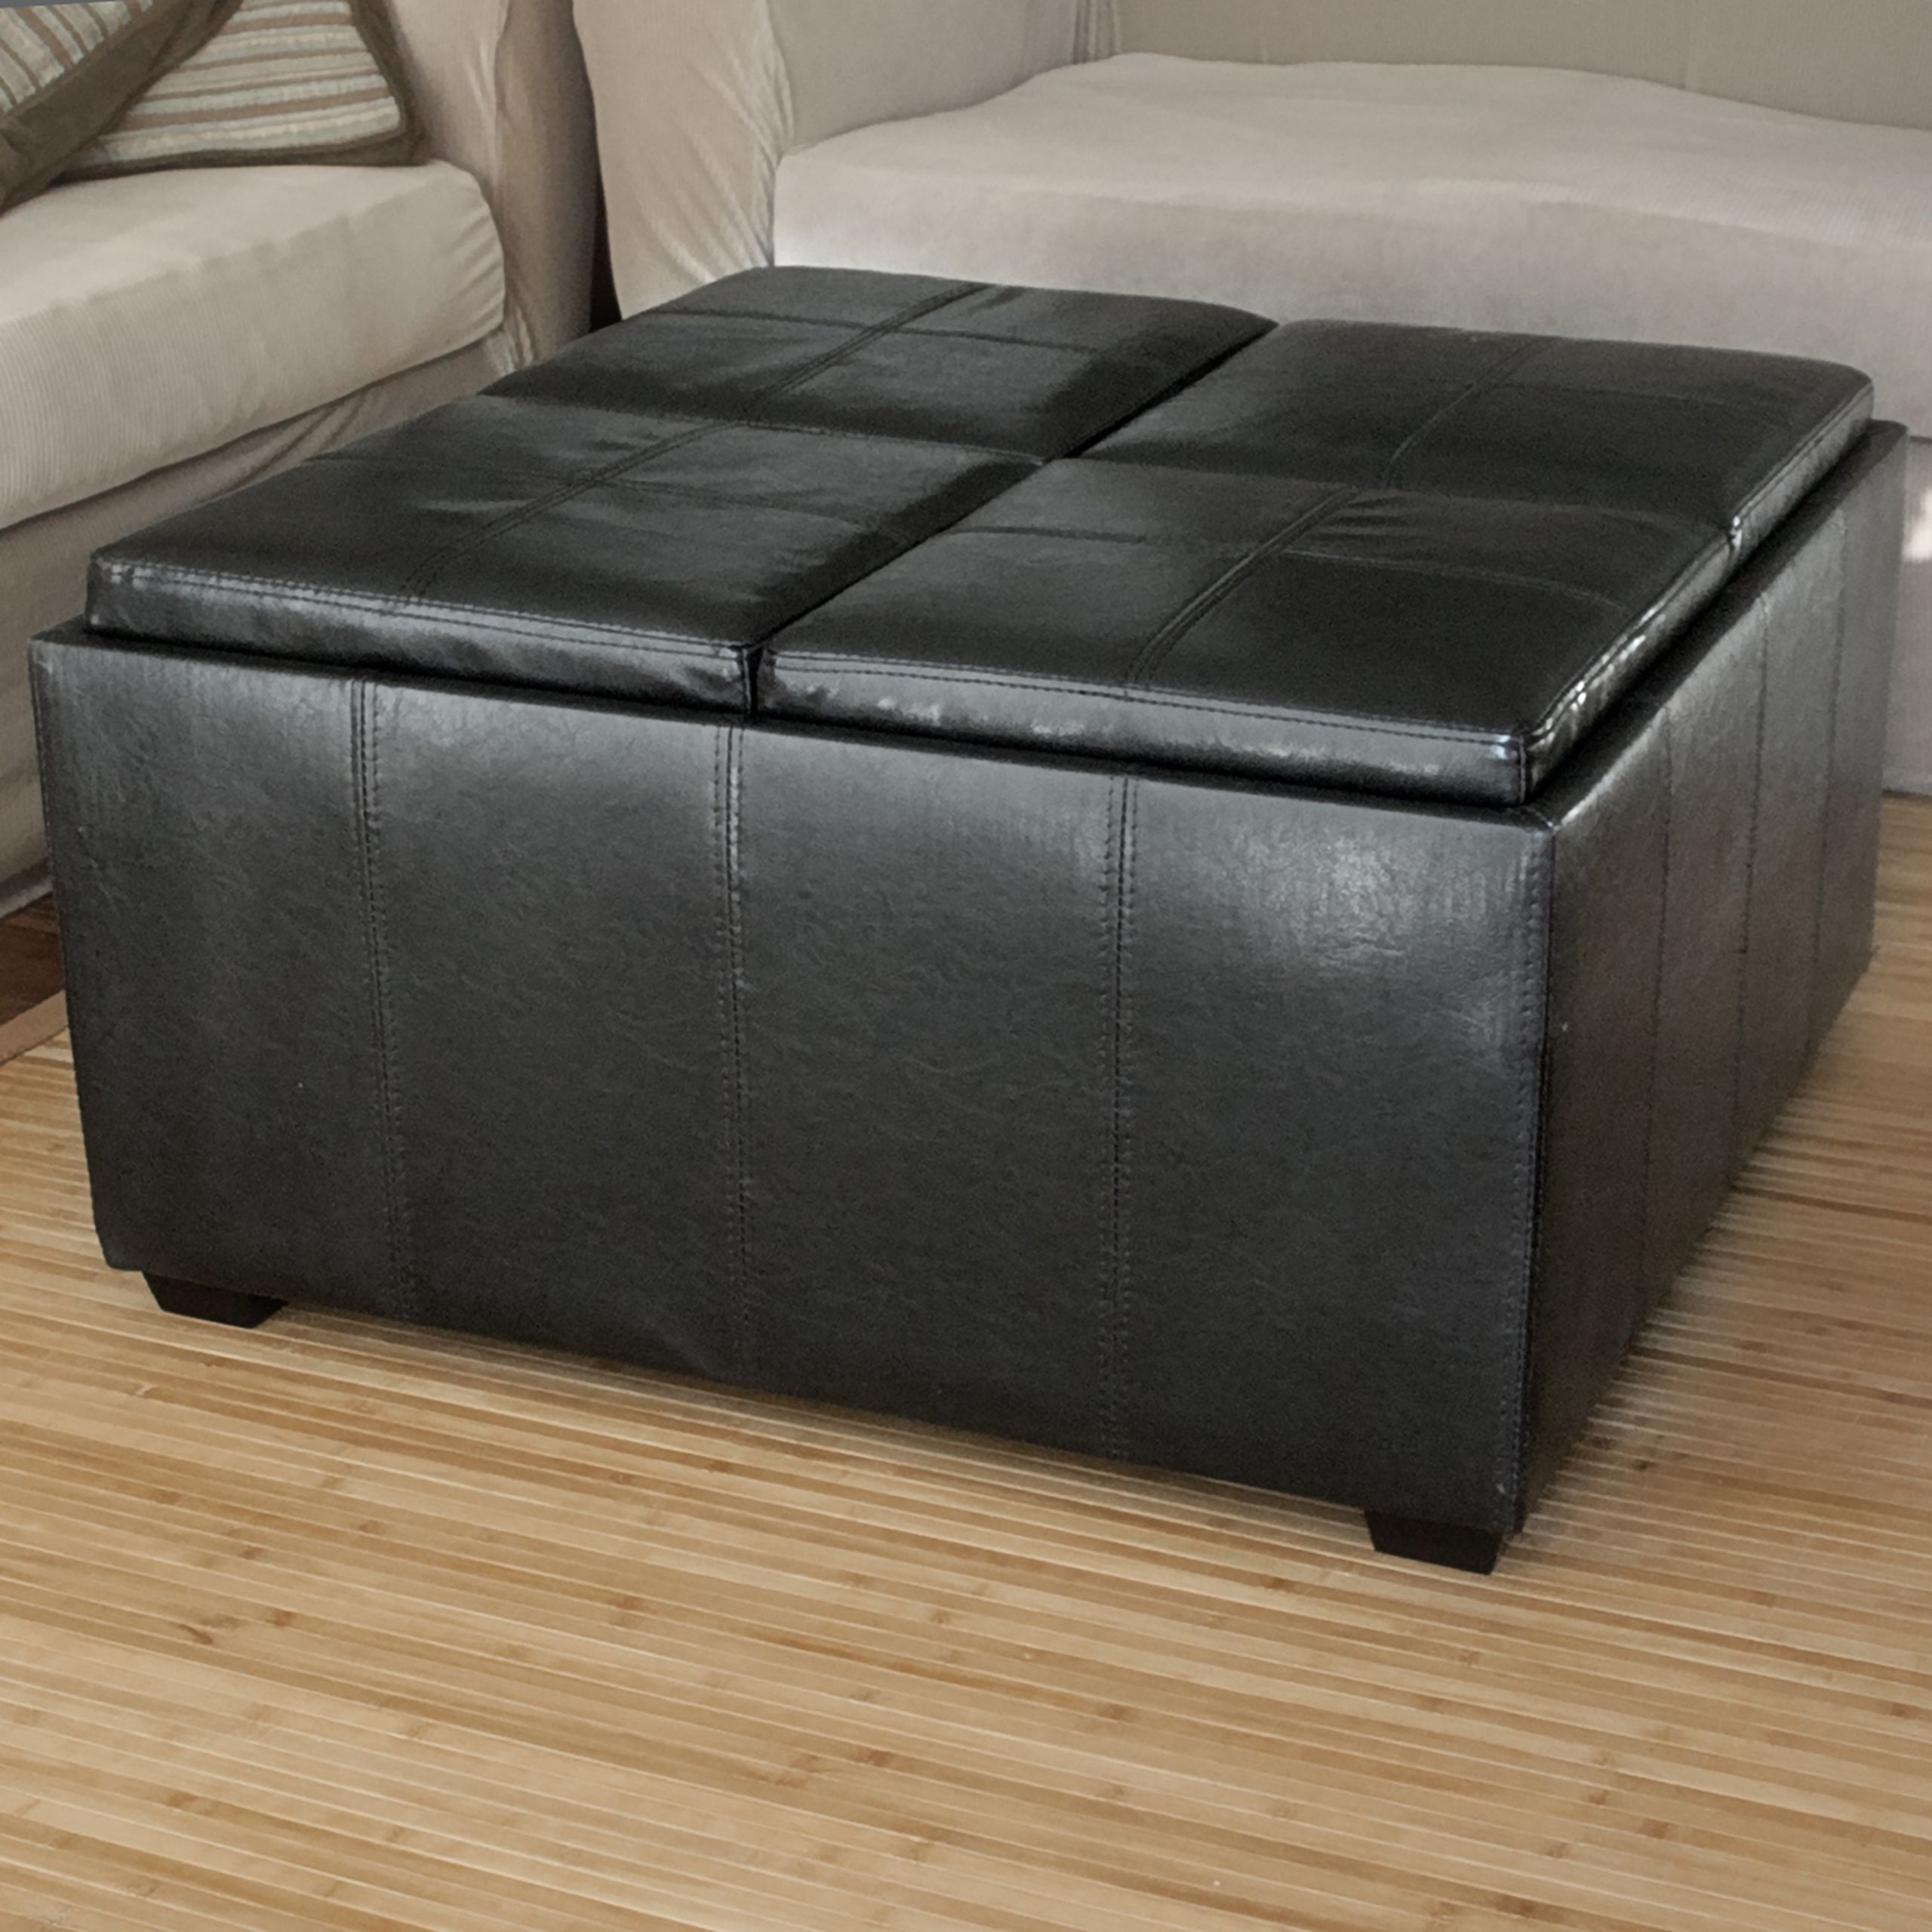 Storage Bench With Tray
 Leather Ottoman With 4 Tray Tops Storage Bench Coffee